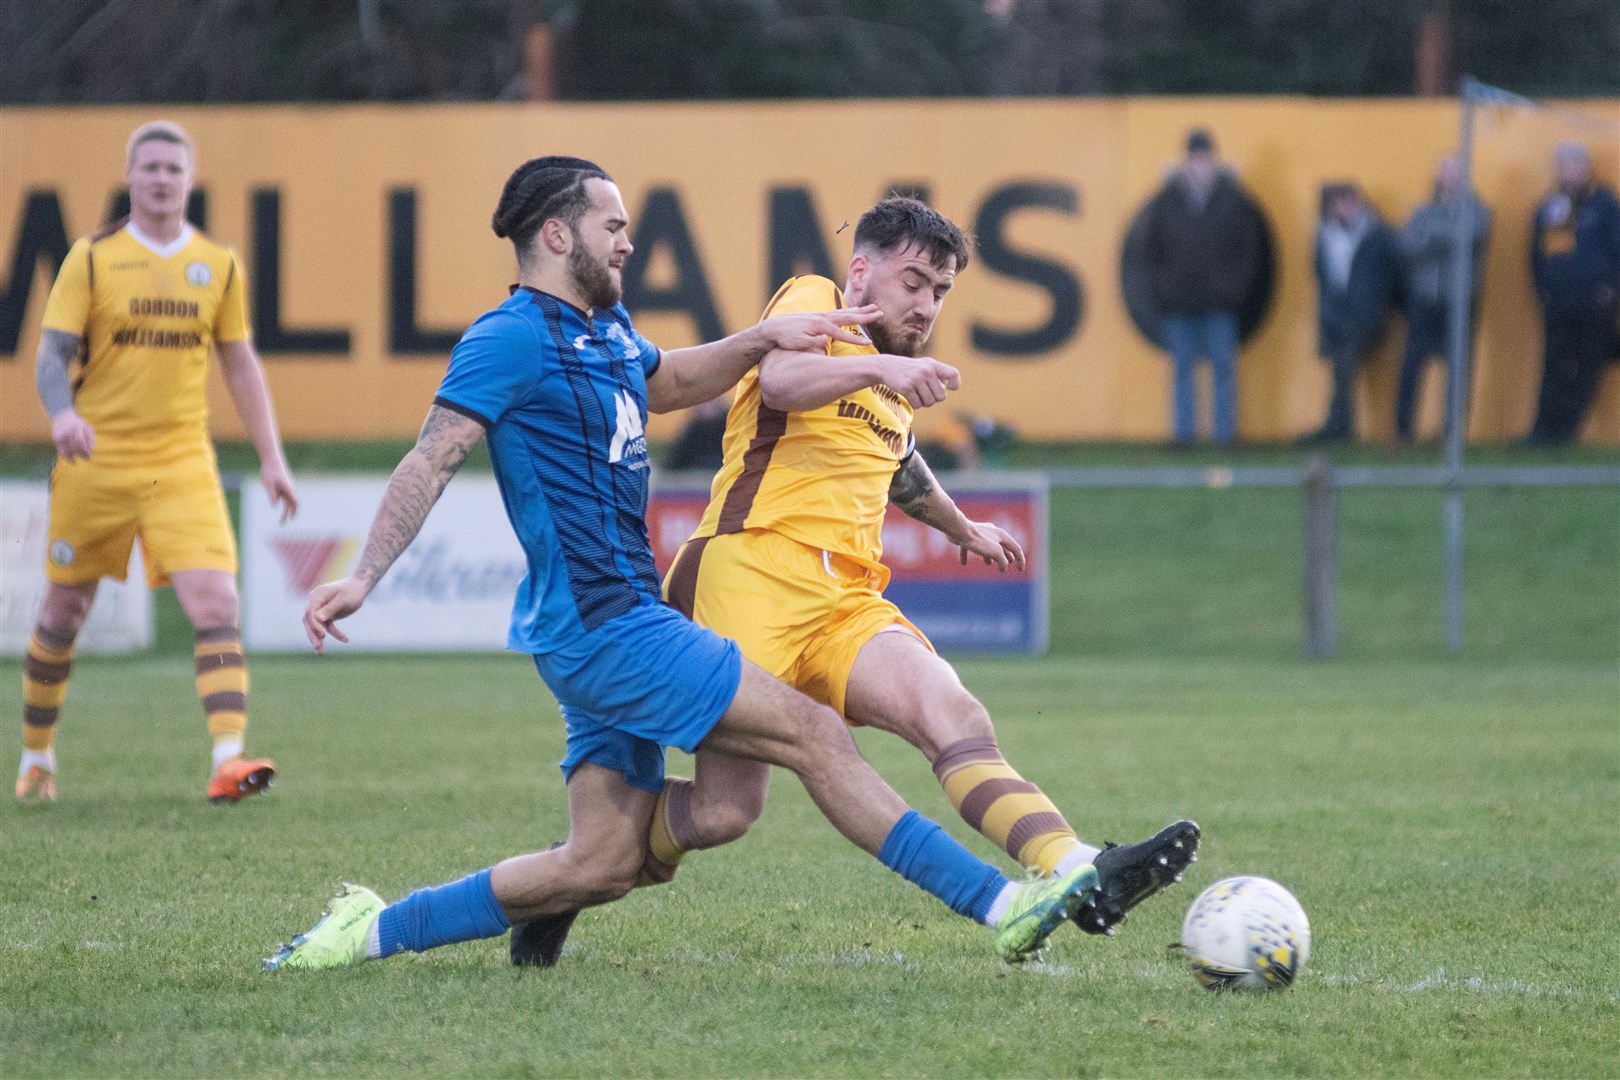 Strathspey Thistle's Connor Austin and Forres' Martin Groat compete...Forres Mechanics FC (8) vs Strathspey Thistle FC (1) - Highland Football League 22/23 - Mosset Park, Forres 07/01/23...Picture: Daniel Forsyth..